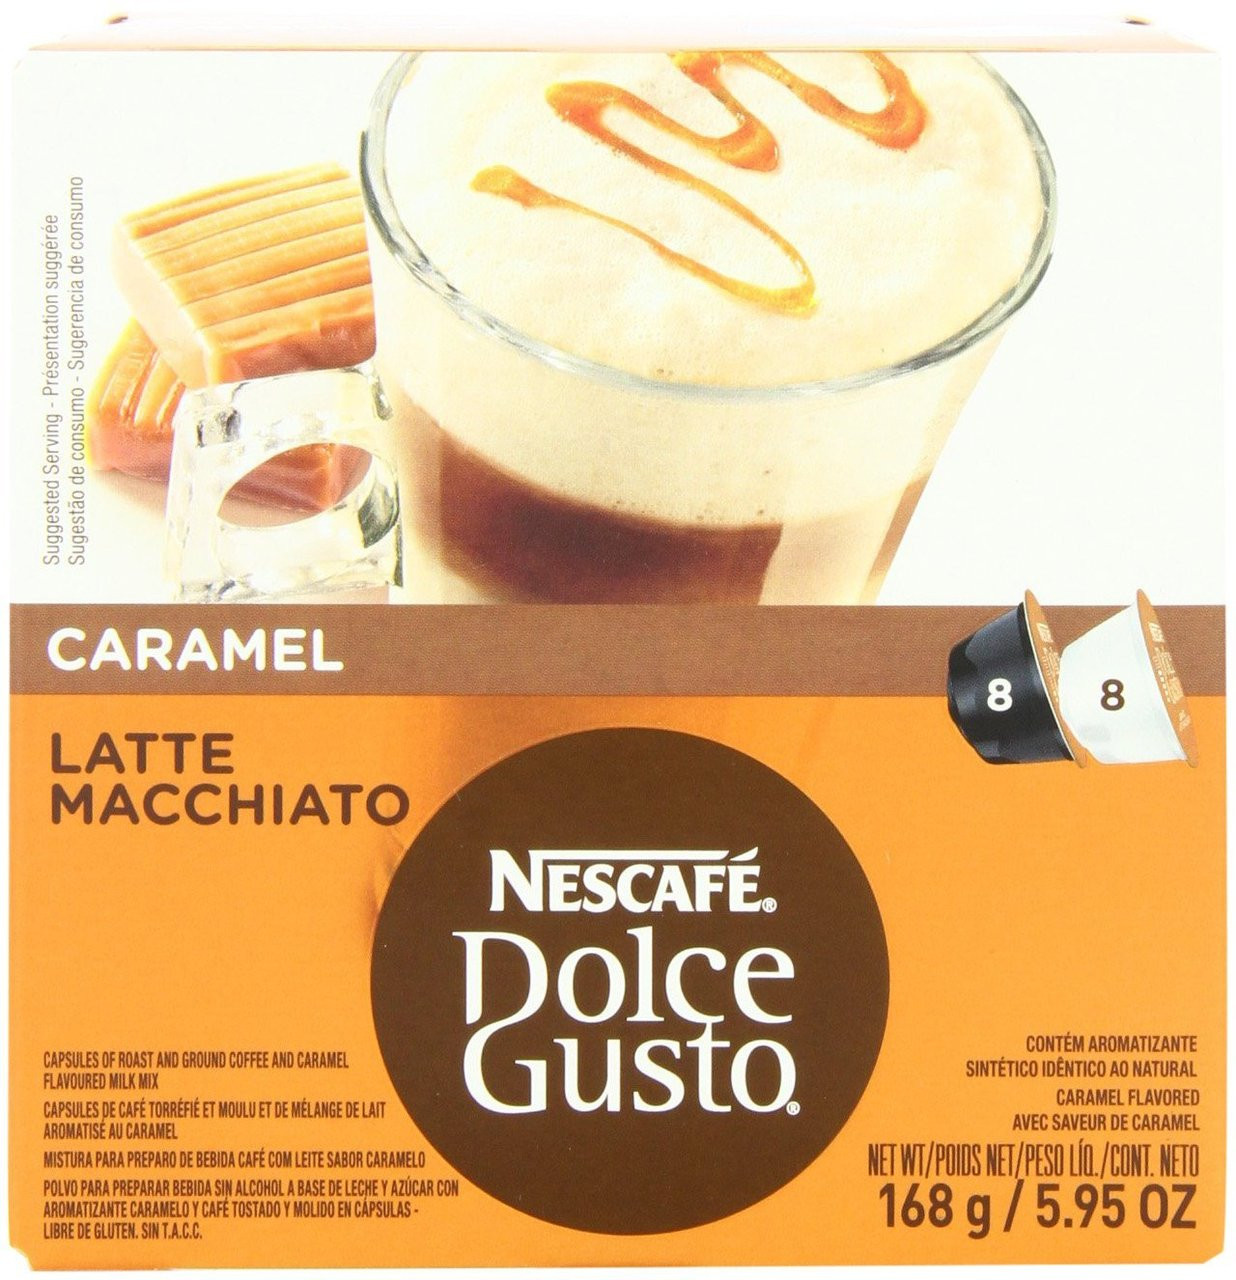  Dolce Gusto Nescafe Coffee Pods, Cappuccino, 16 capsules (Pack  of 3) : Grocery & Gourmet Food